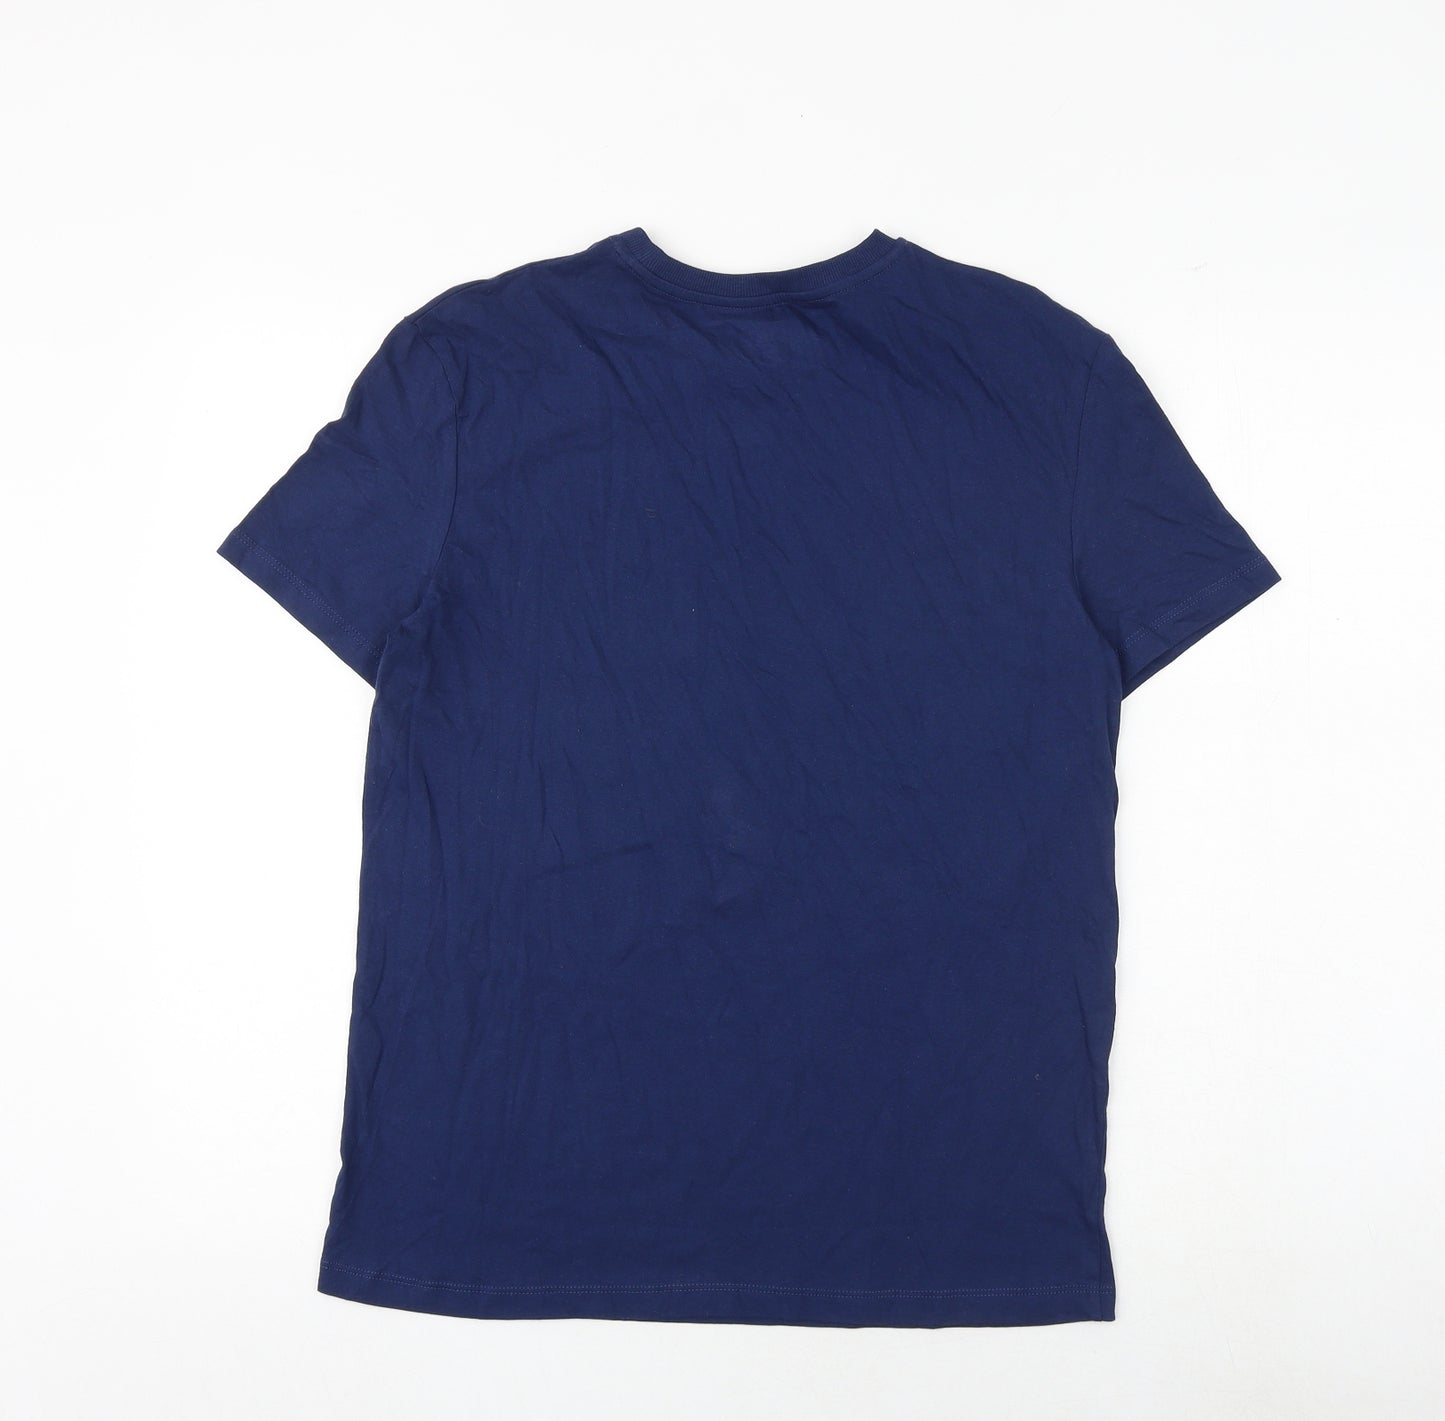 Gap Boys Blue Cotton Basic T-Shirt Size 13-14 Years Round Neck Pullover - Today Is A Good Day